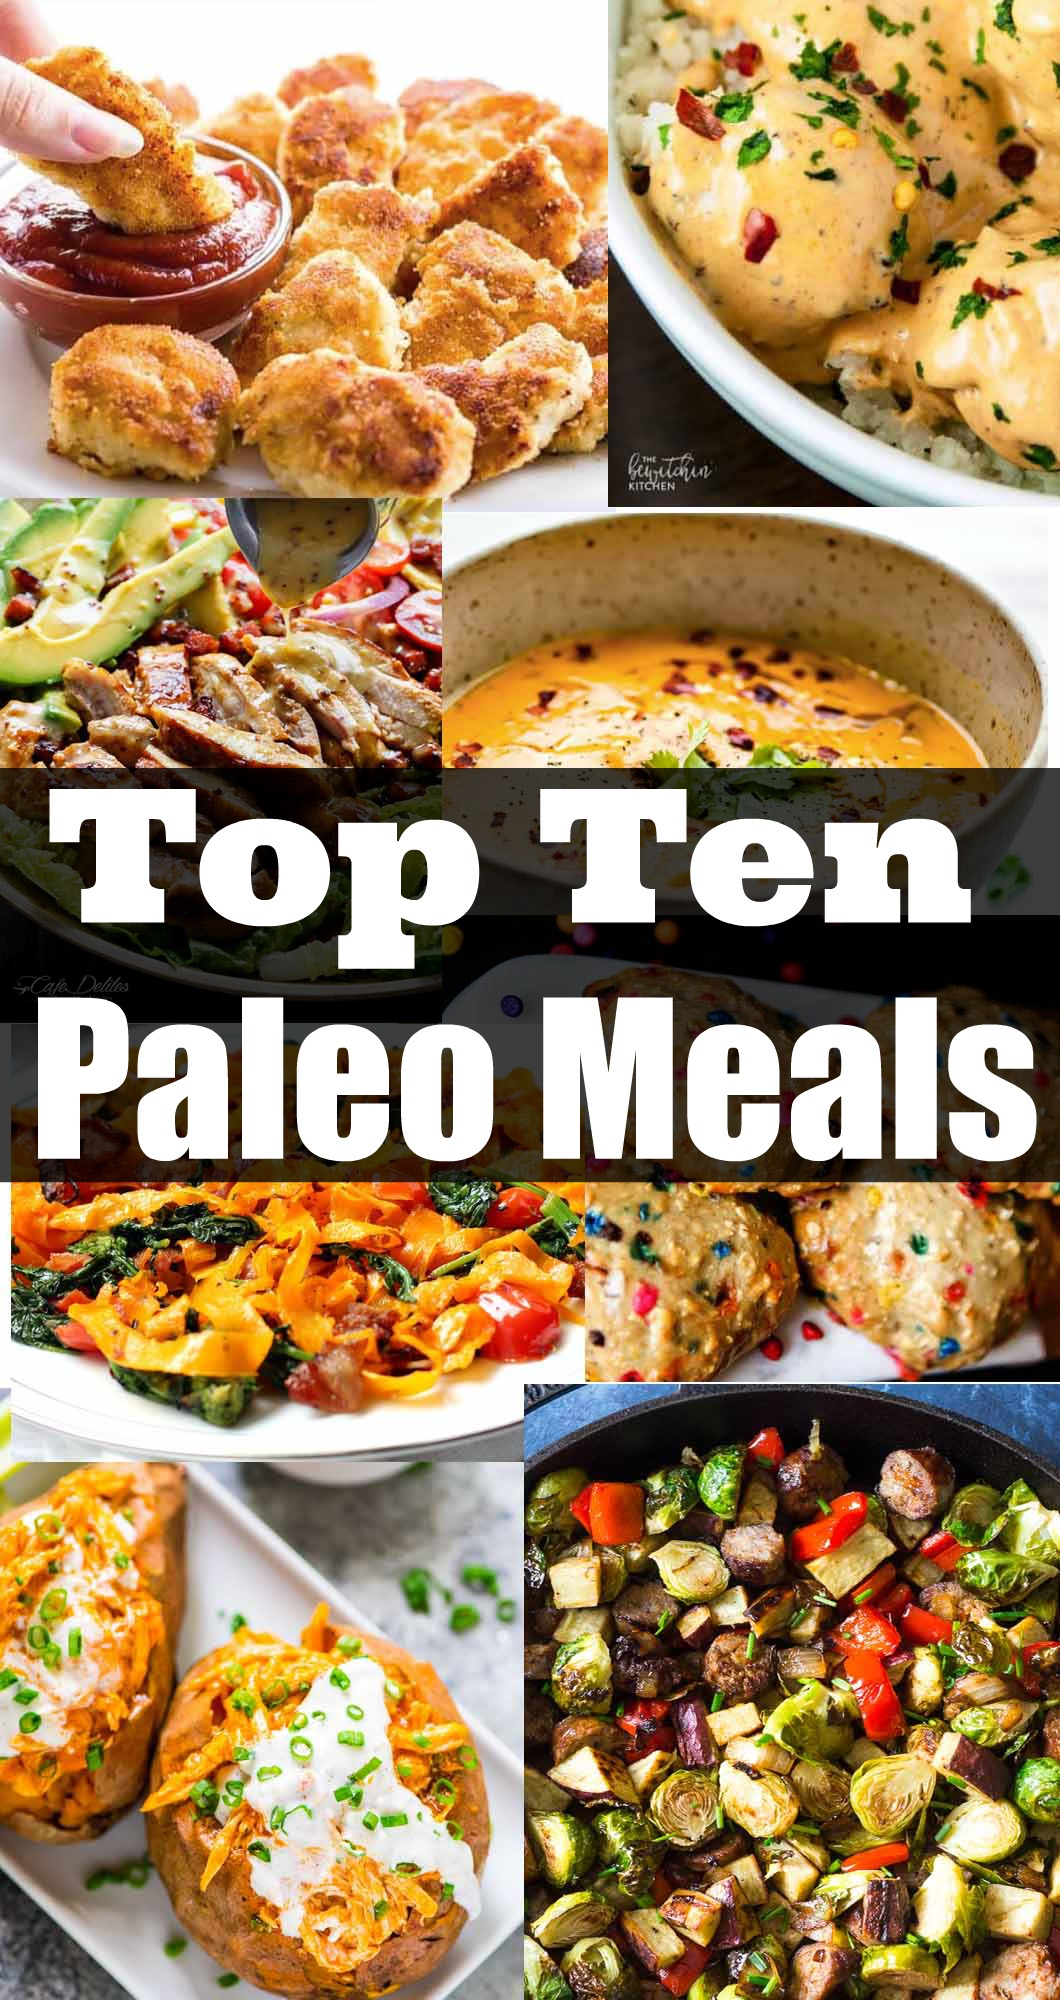 Top Ten Paleo Meals by Jessica from Happily Hughes